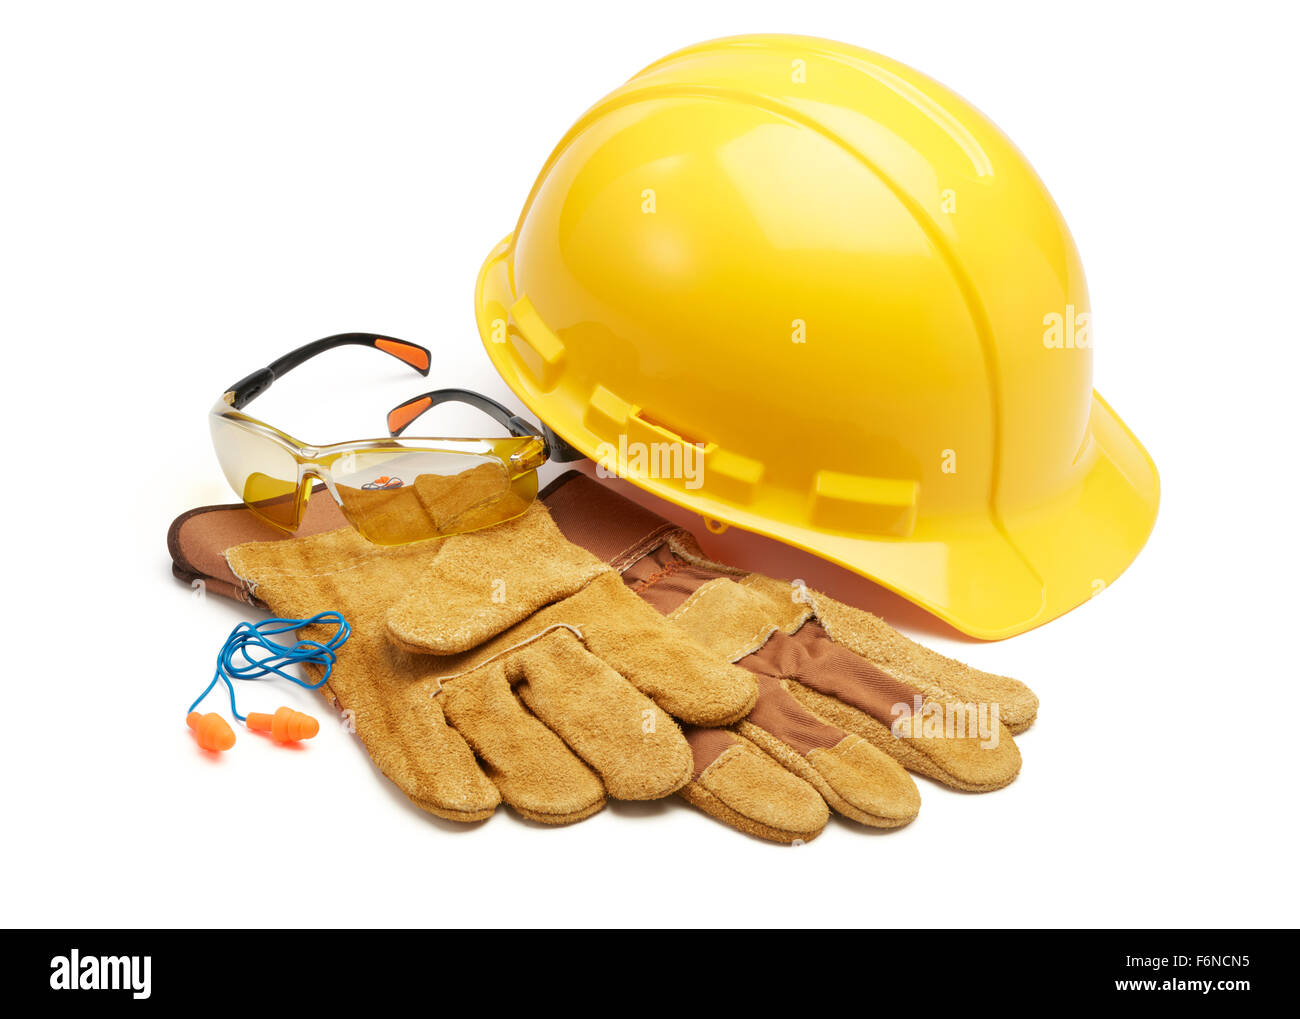 various type of protective workwears against white background Stock Photo